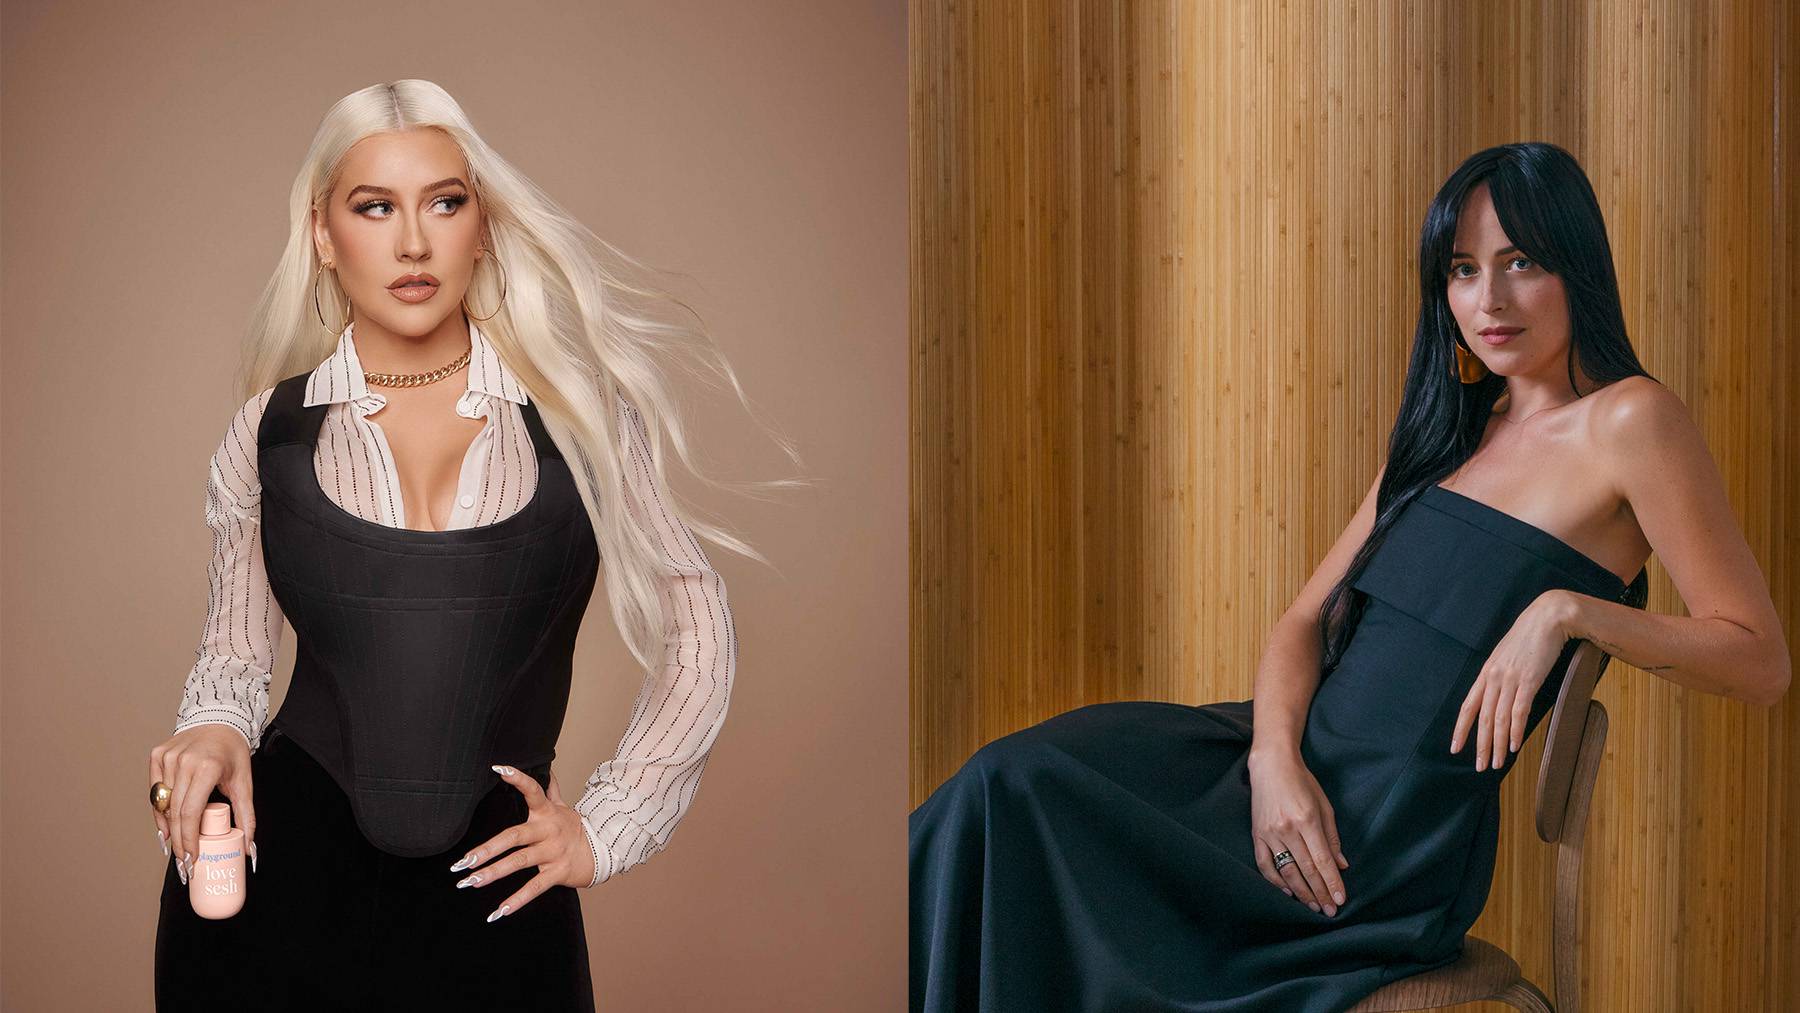 Christina Aguilera joins Playground as cofounder, and Maude named Dakota Johnson its co-creative director in 2020.